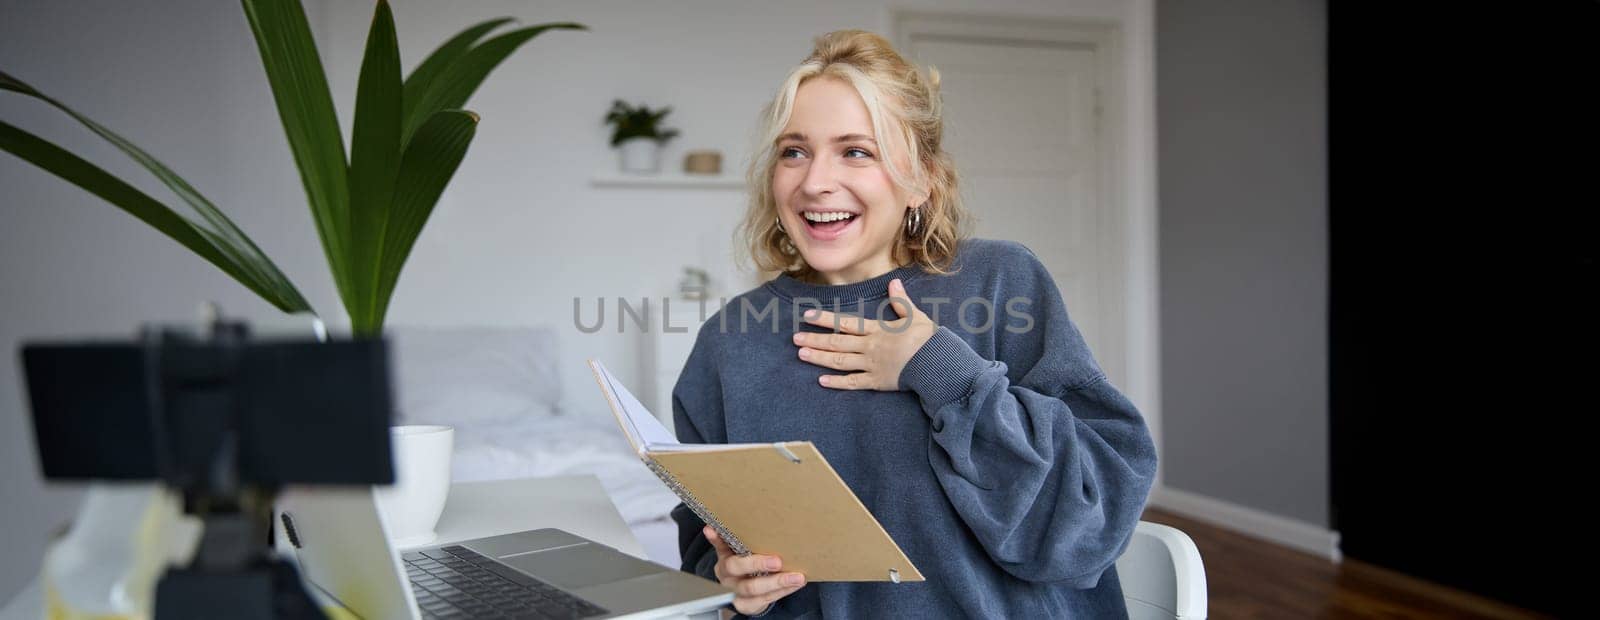 Portrait of smiling, beautiful young blond woman, student working on assignment from home, online learning in her bedroom, talking to video camera, chatting, holding notebook.